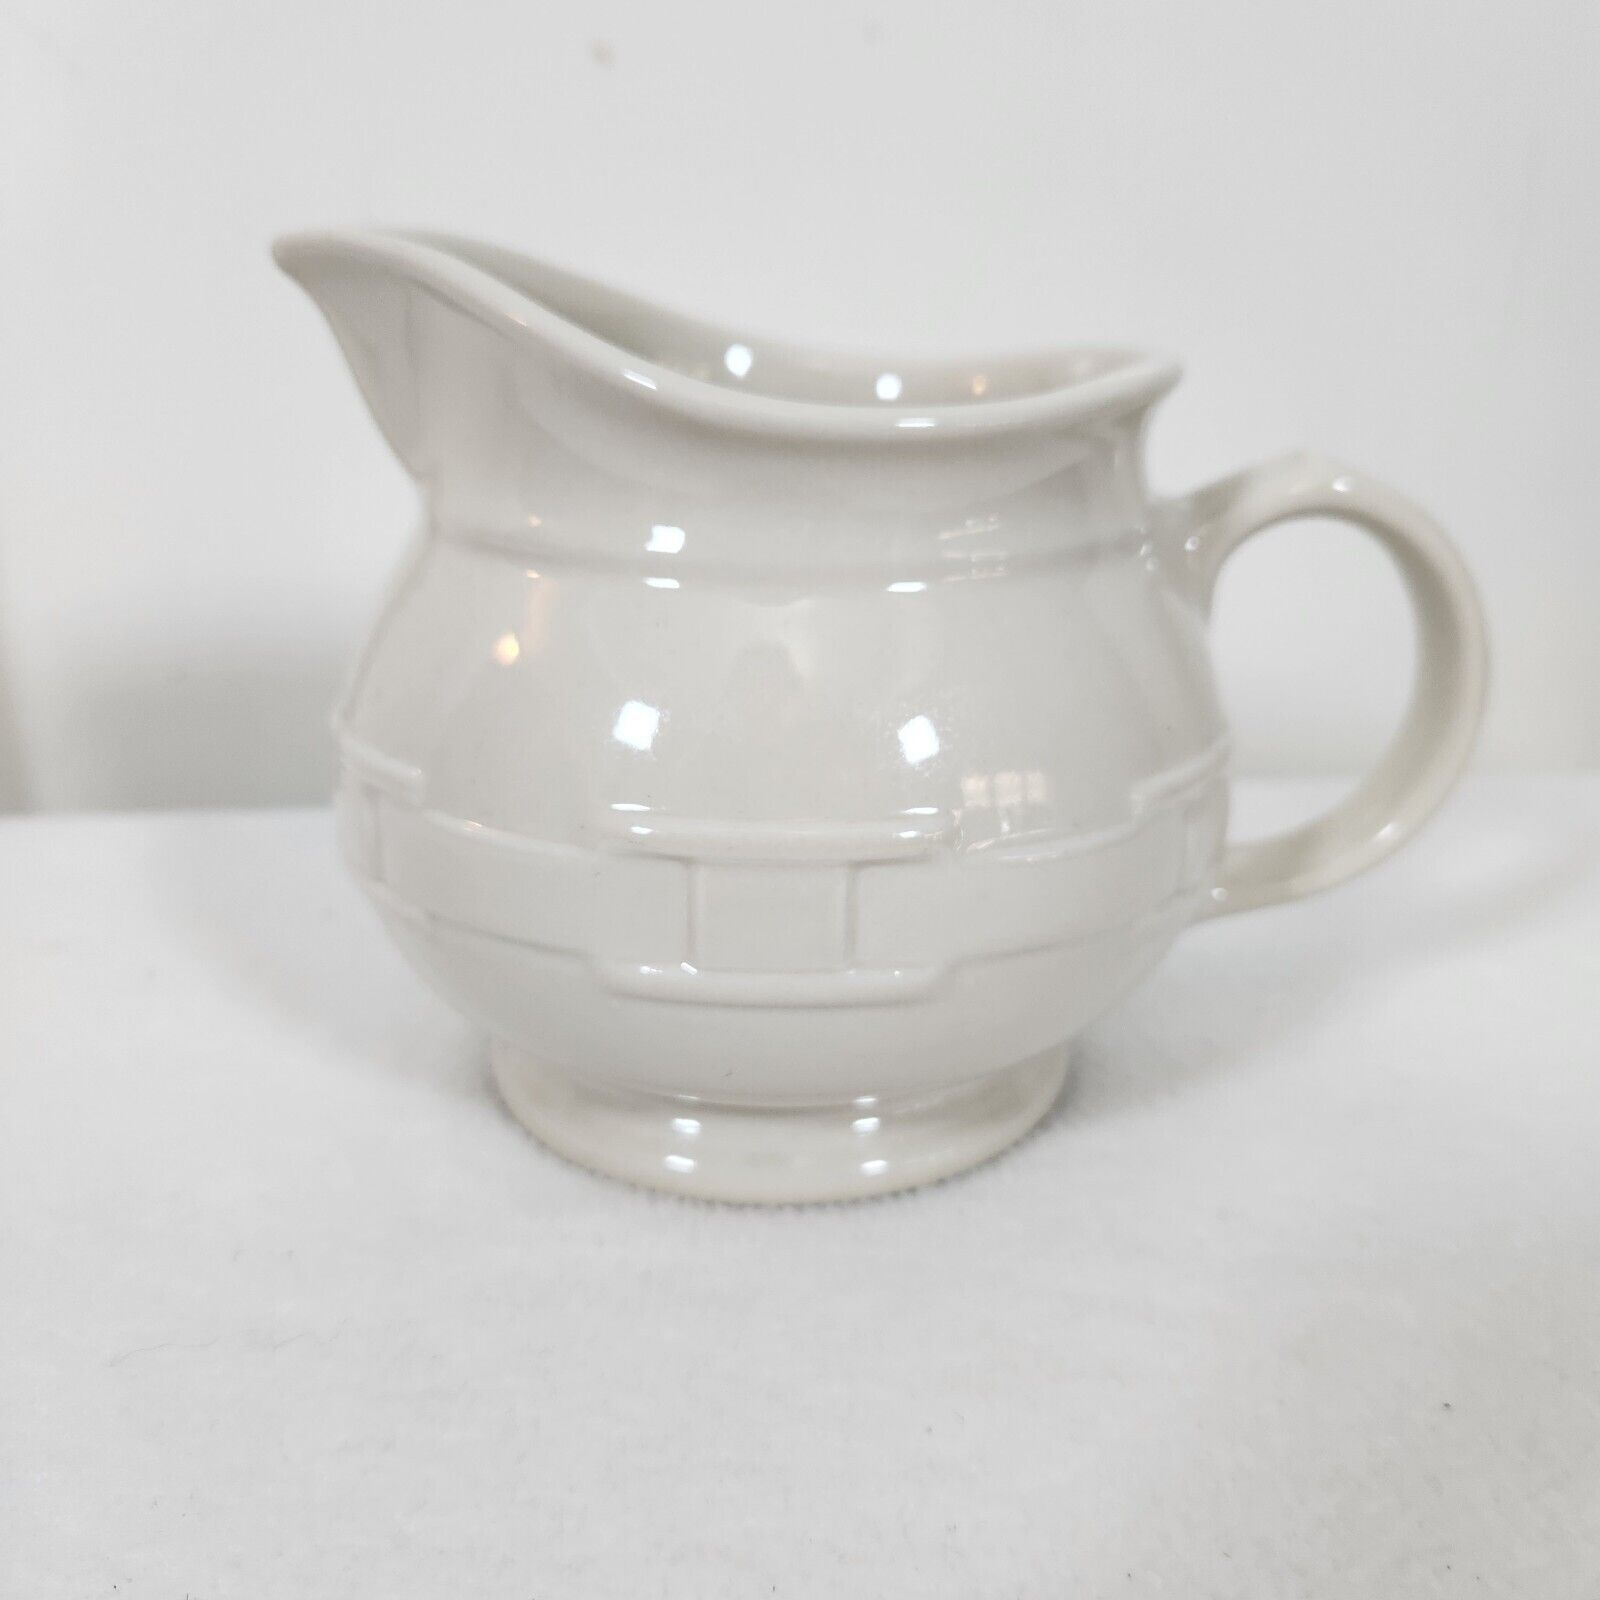 Longaberger 2004 Woven Traditions Pottery Heirloom Ivory Sauce Pitcher 20 oz EUC